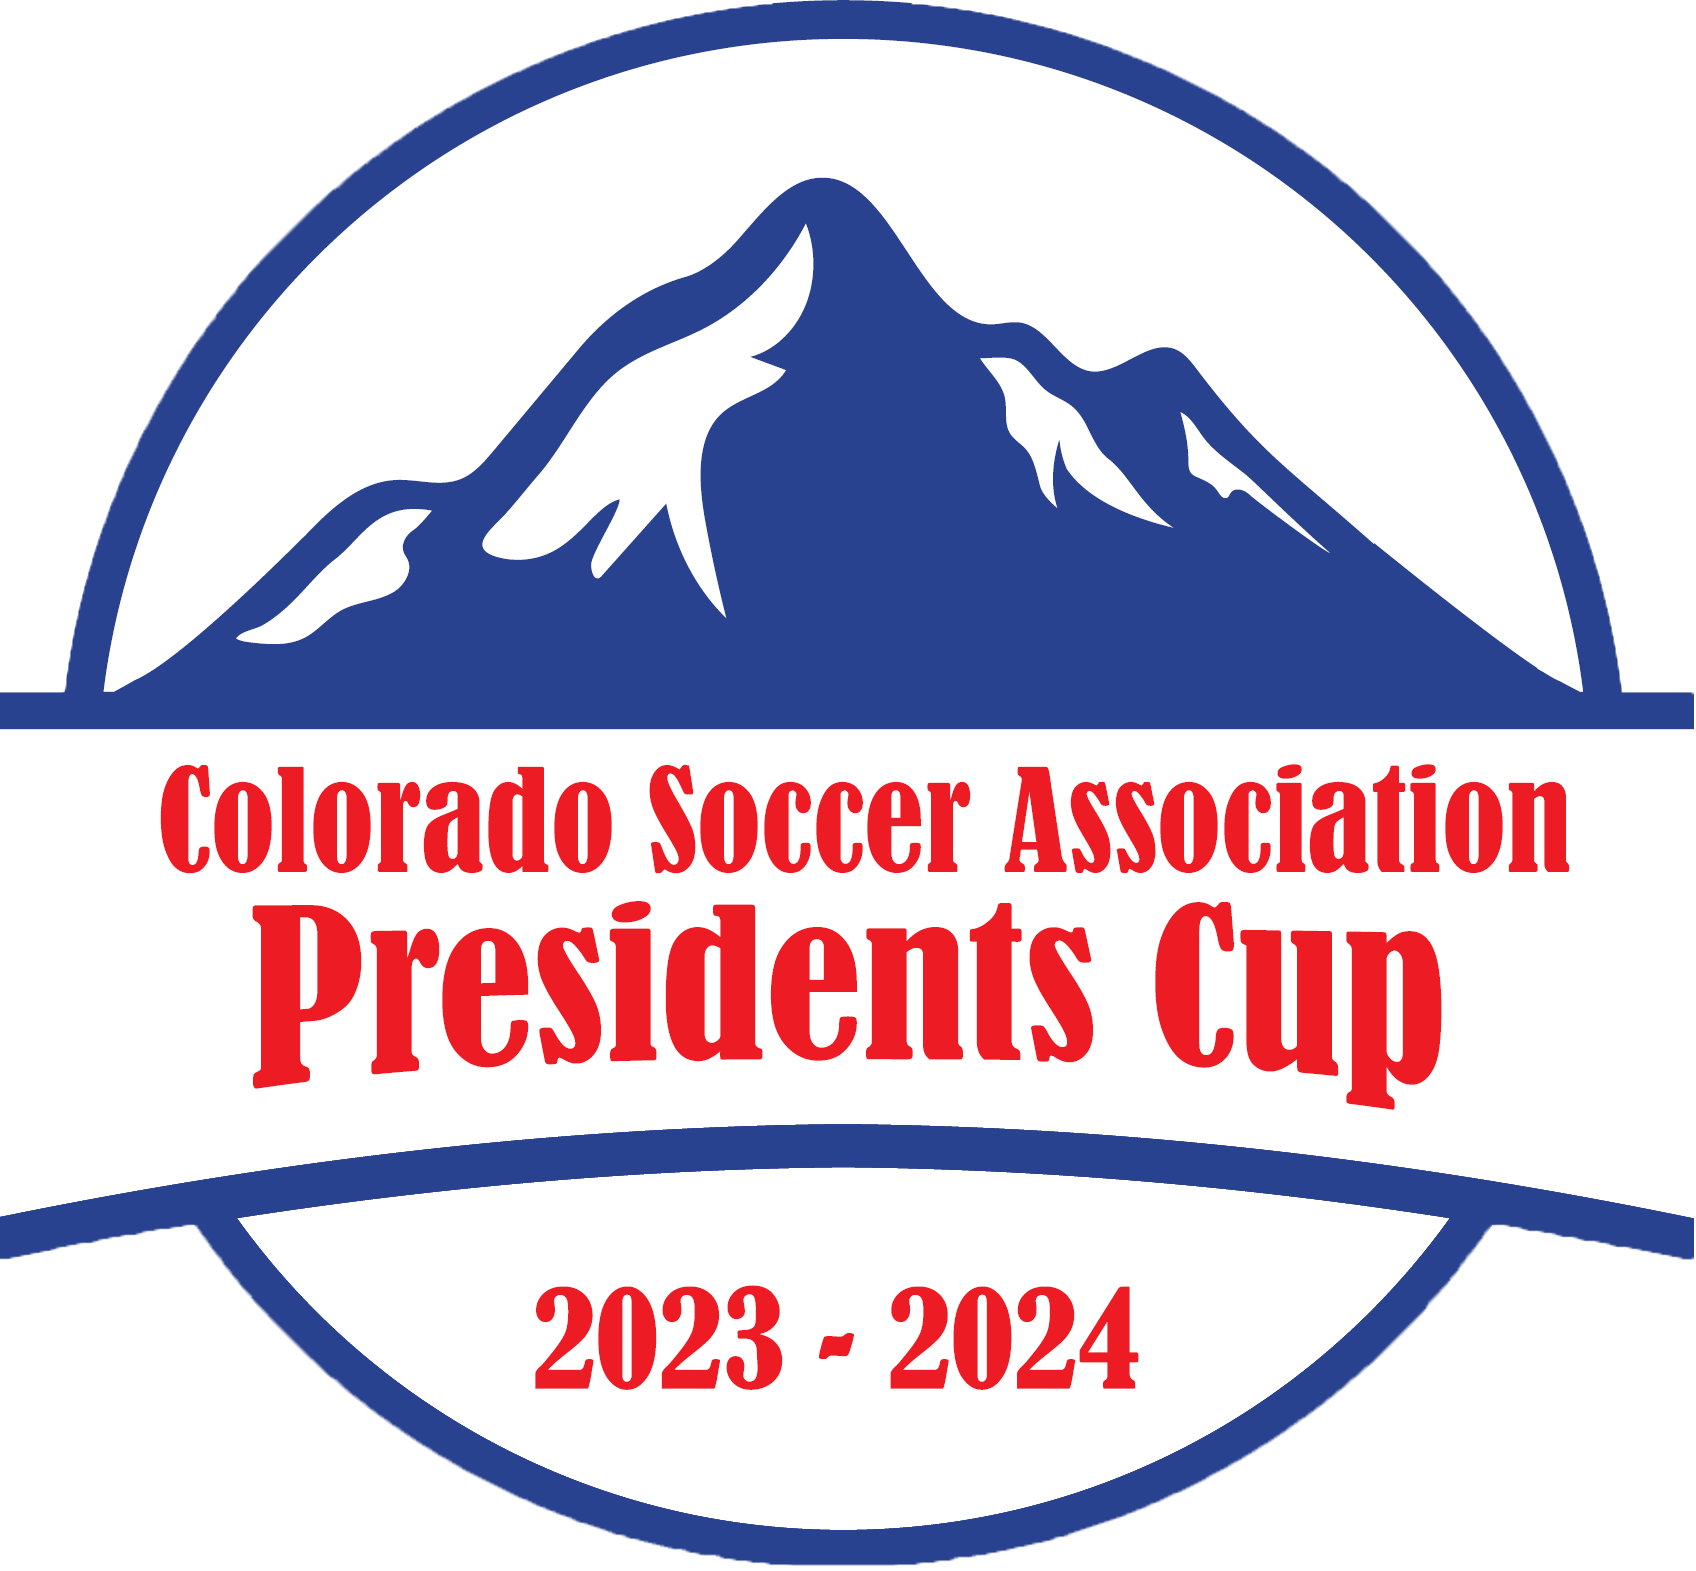 watch the presidents cup 2022